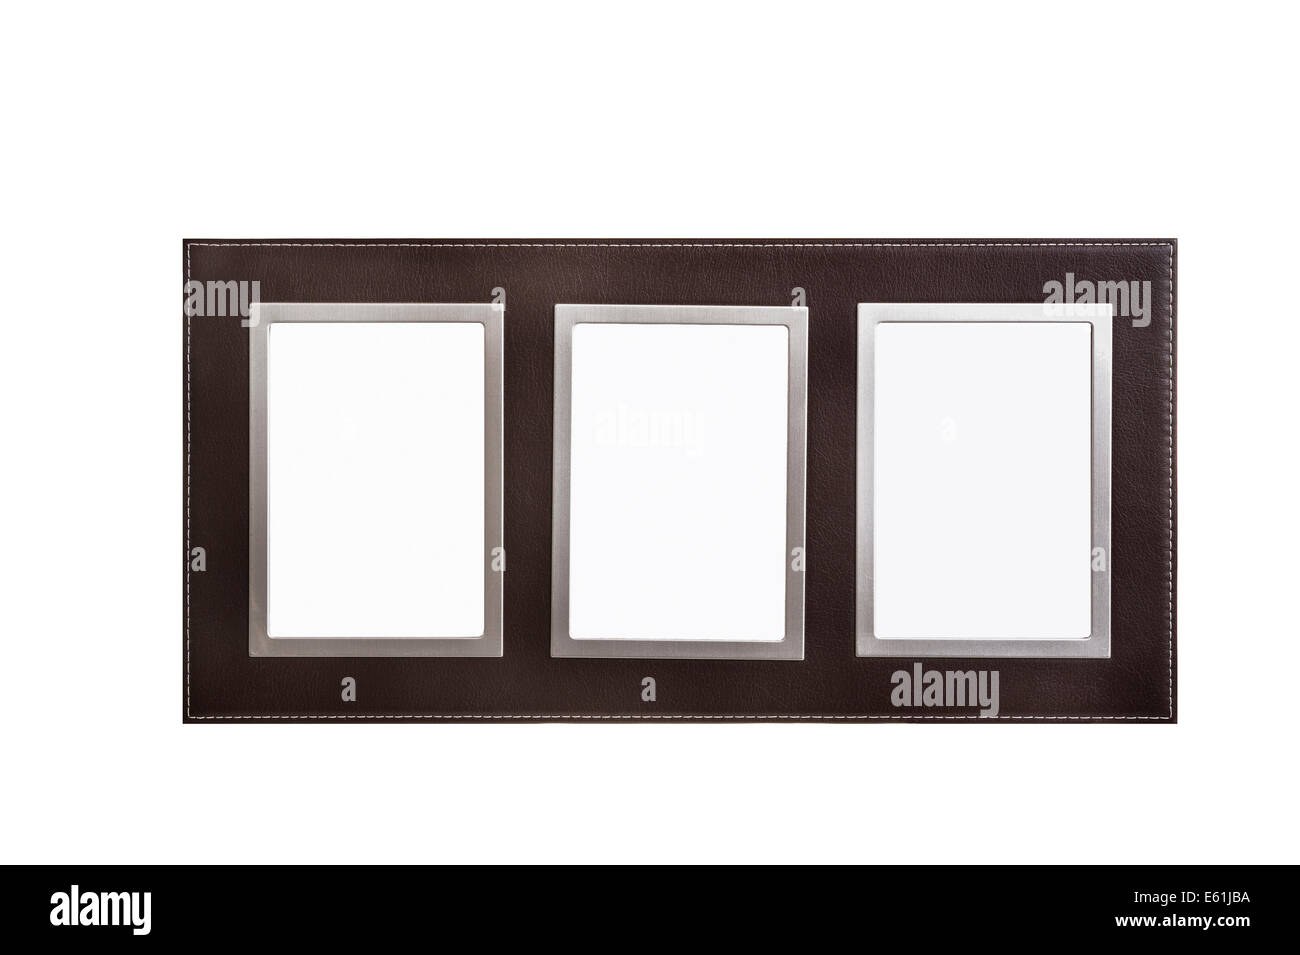 Brown leather and brushed aluminium triple photograph frame. Stock Photo